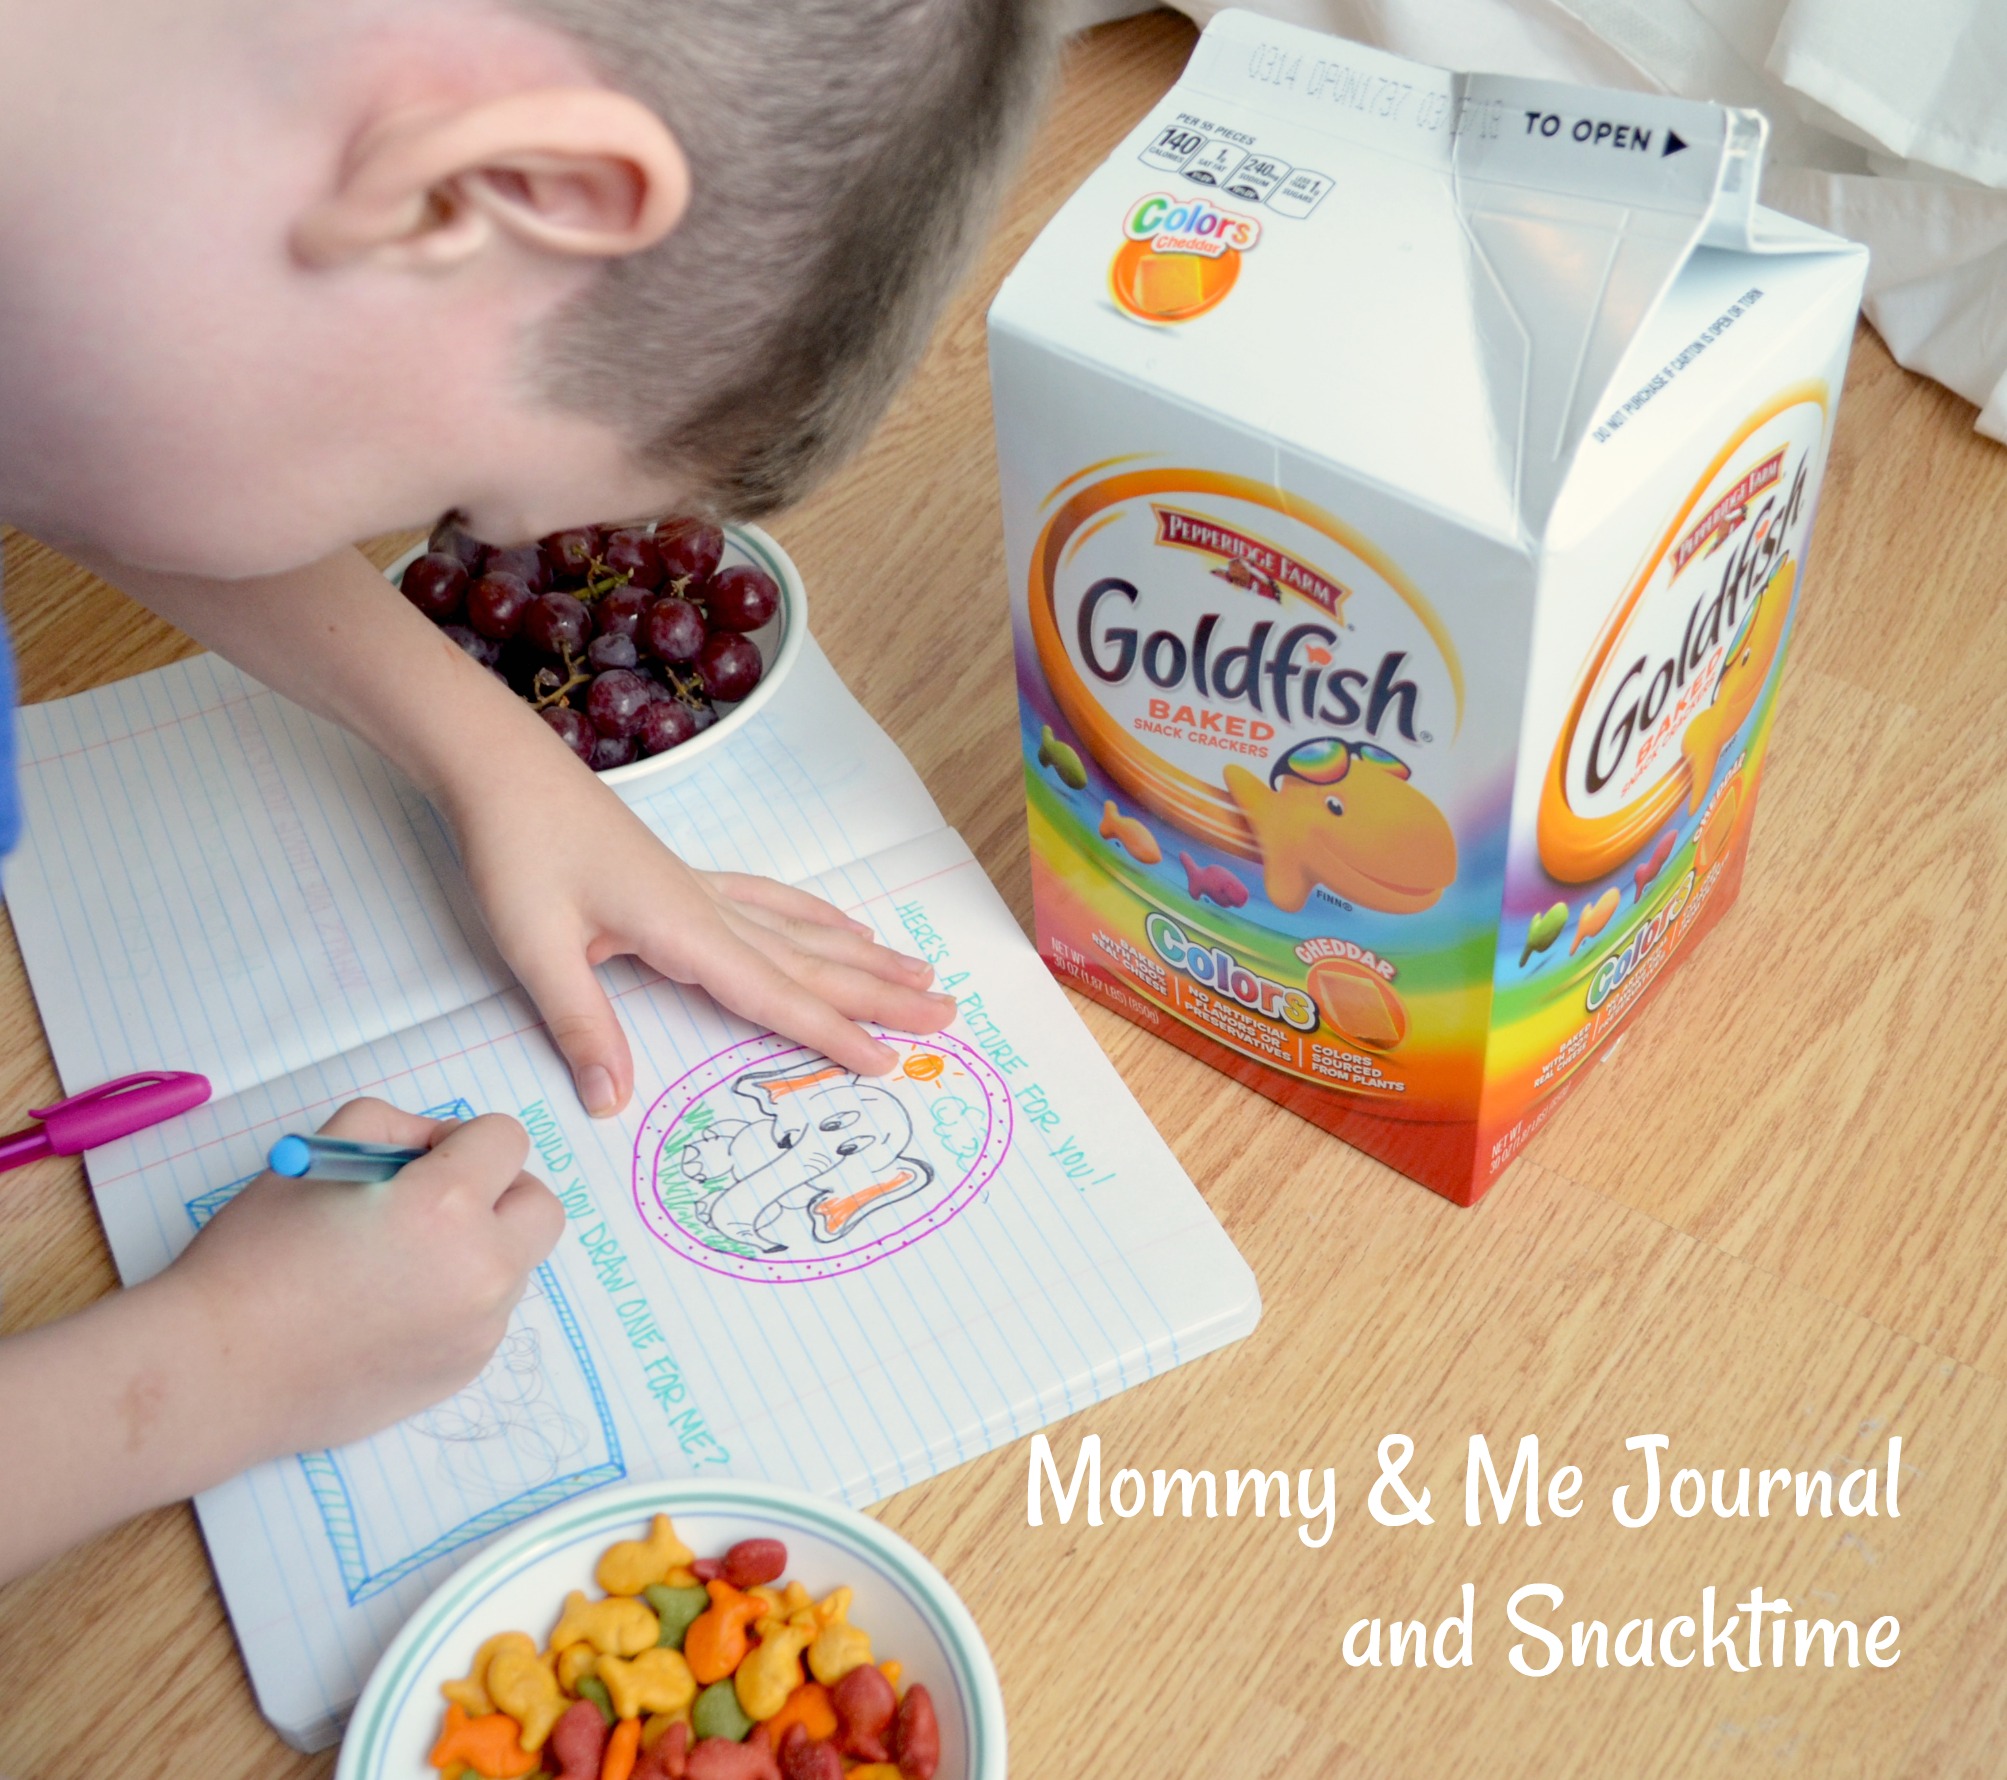 Mommy & Me Journal